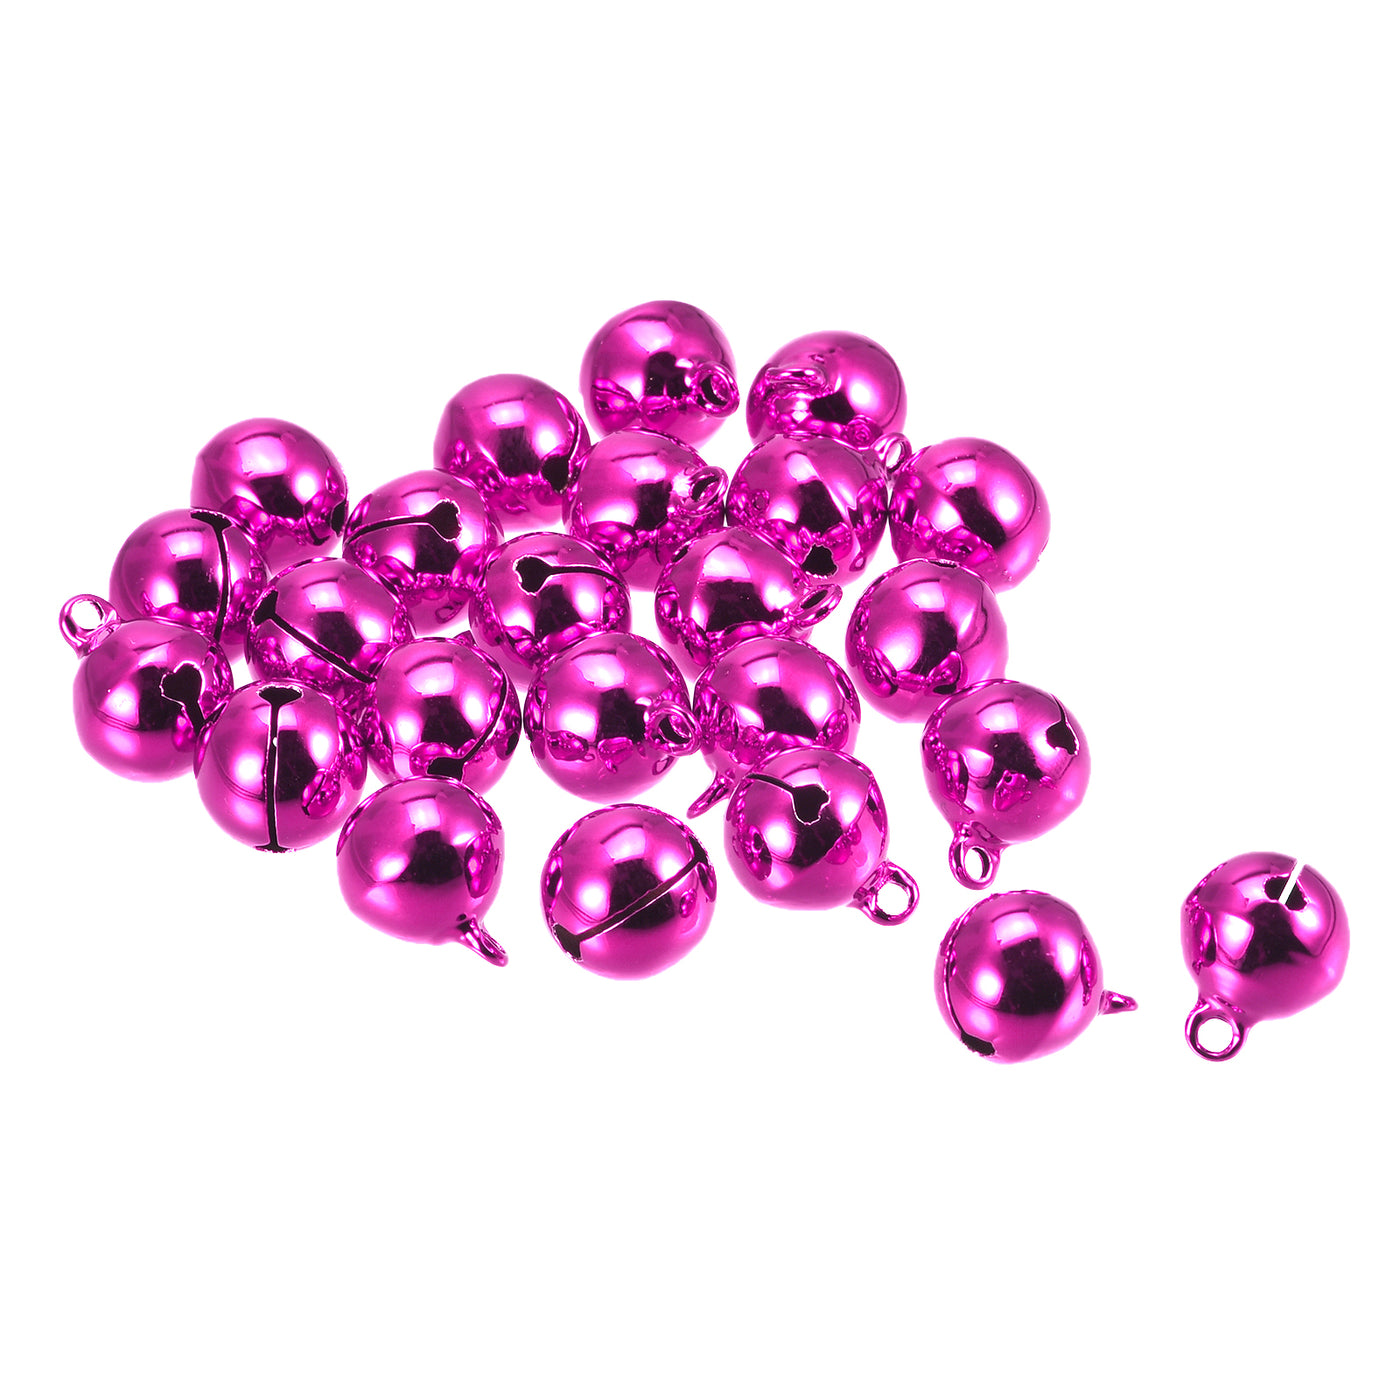 Uxcell Uxcell Jingle Bells, 14mm 24pcs Small Bells for Craft DIY Christmas, Rose Red